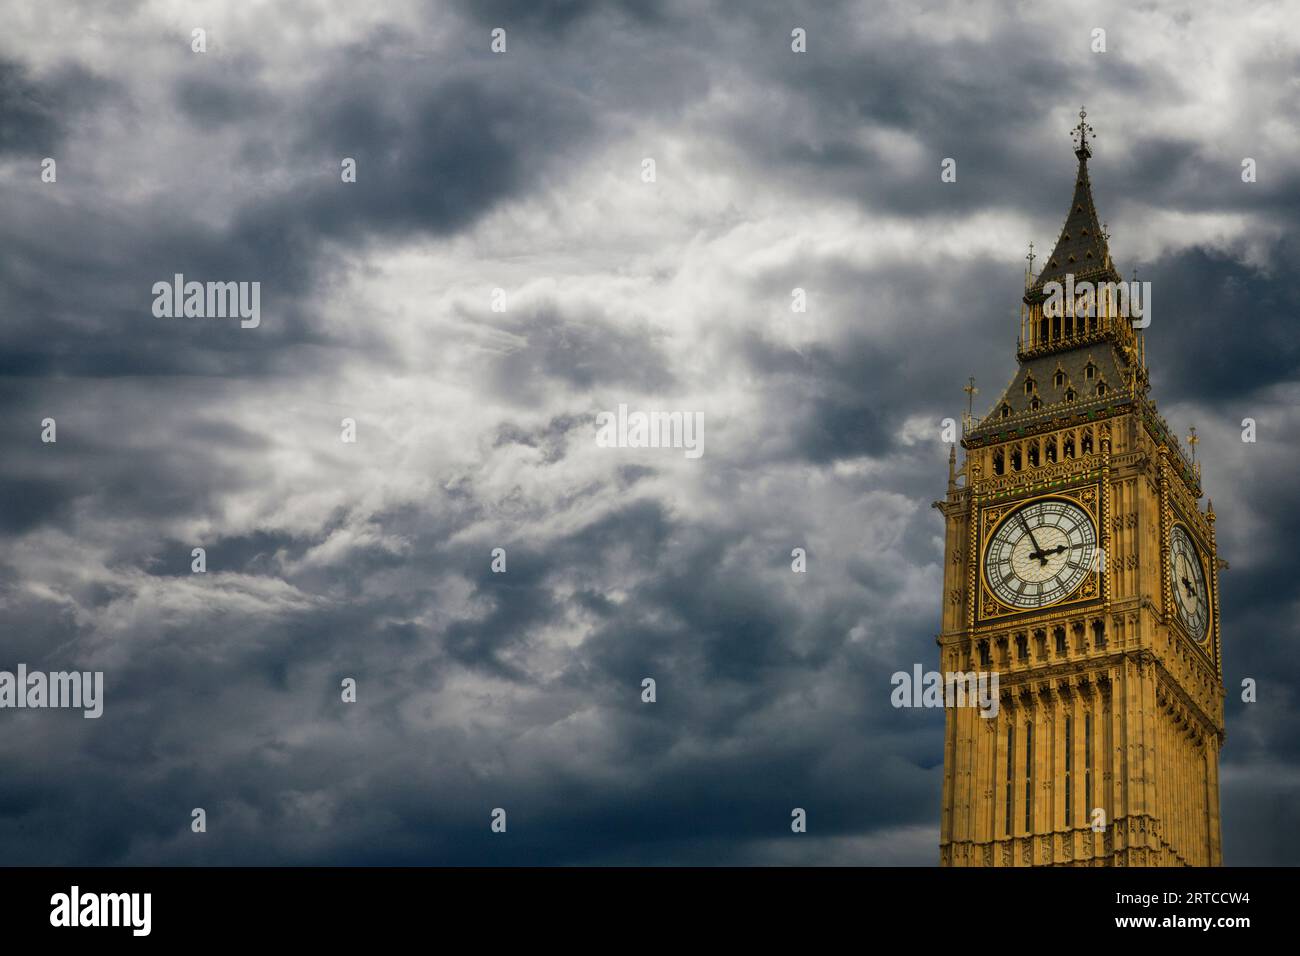 Big Ben on a background of storm clouds. Concepts of trouble ahead, stormy times for London. Stock Photo